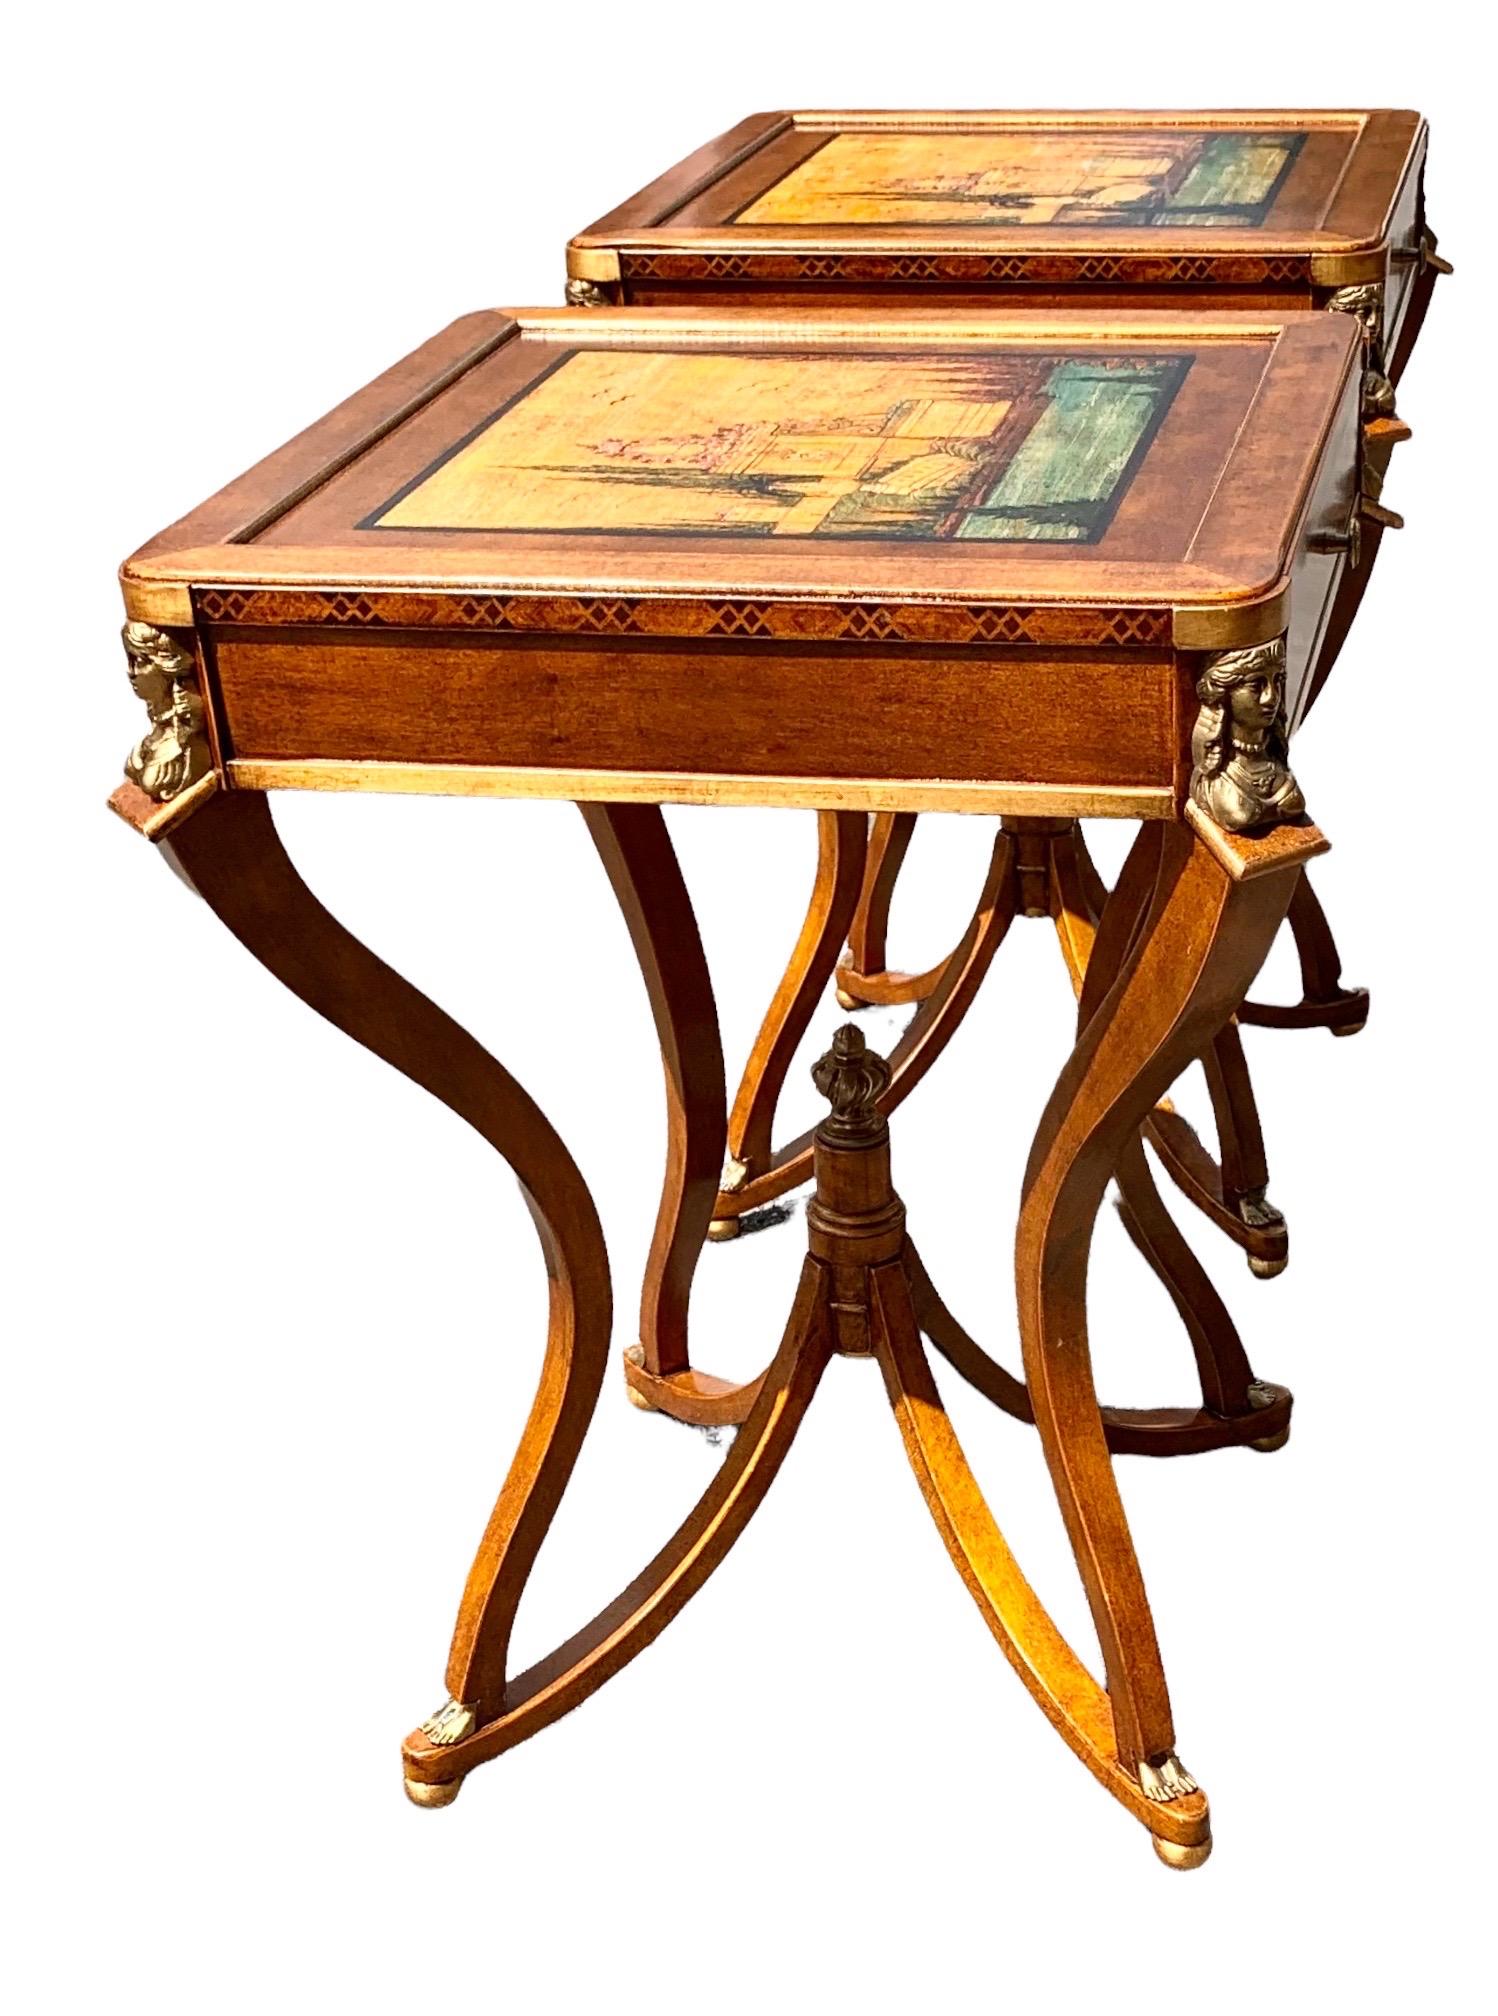 Vintage Unusual Pair of Hand Painted Scenes, Italian Side Tables with Ormolu In Good Condition For Sale In New Orleans, LA